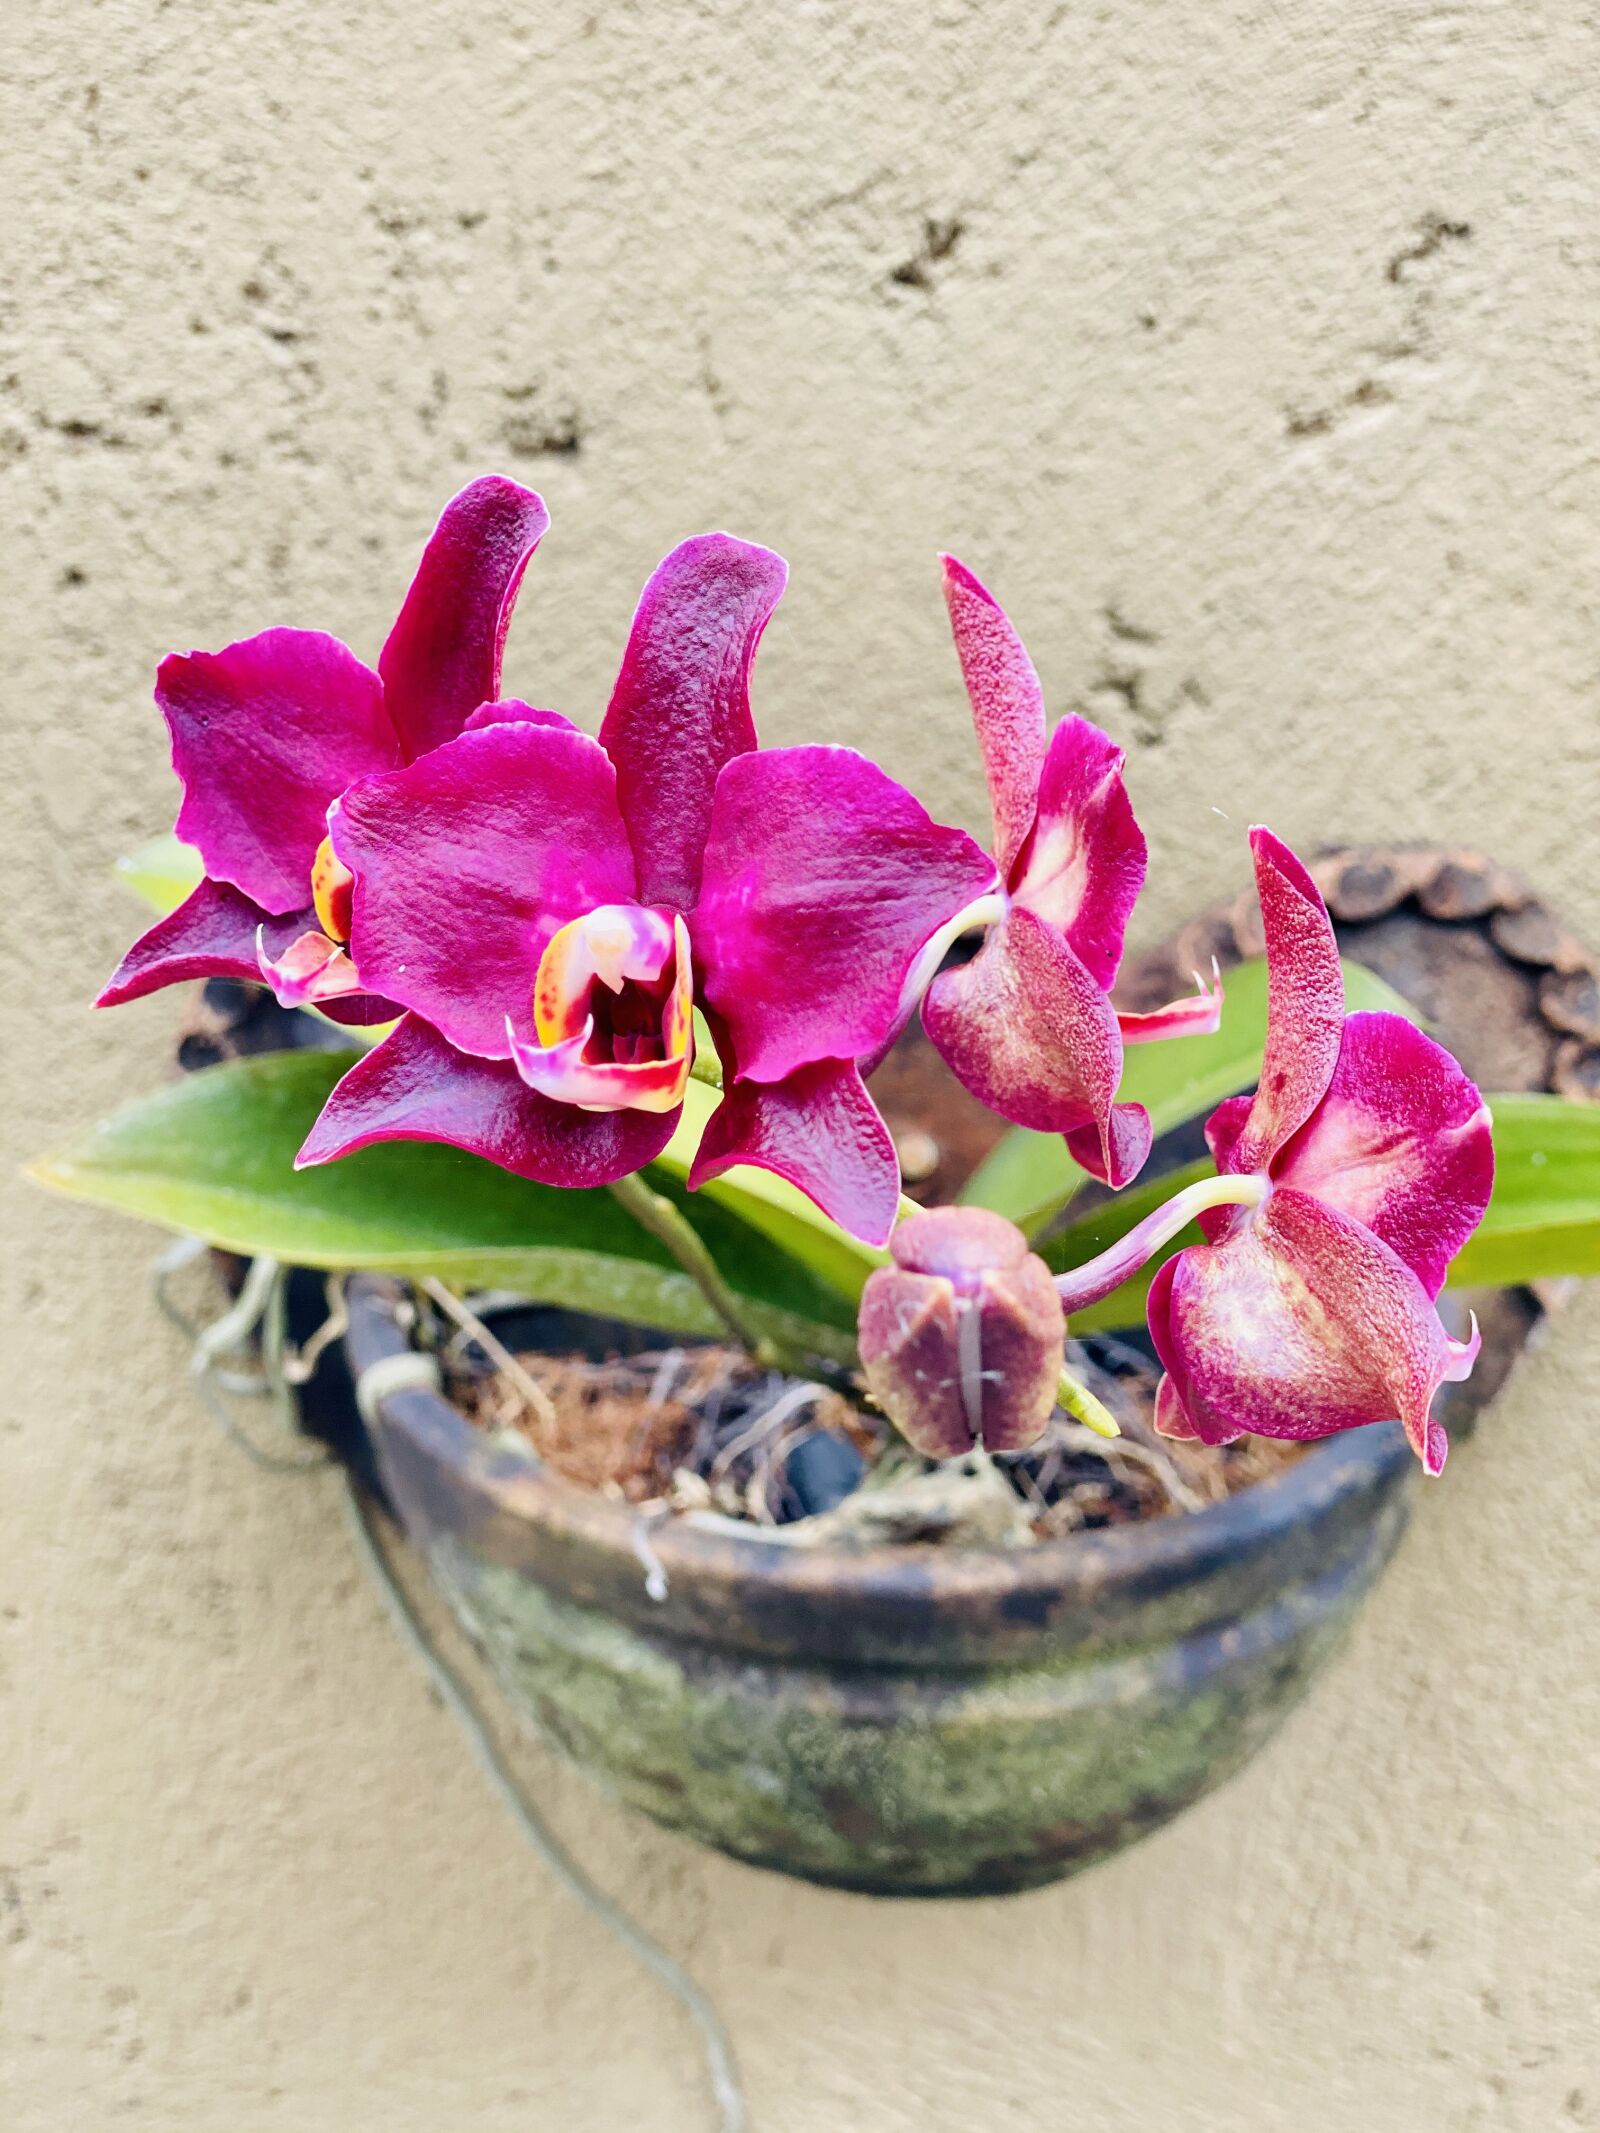 Apple iPhone 11 Pro + iPhone 11 Pro back dual camera 6mm f/2 sample photo. Orchid, bloom, blossom photography